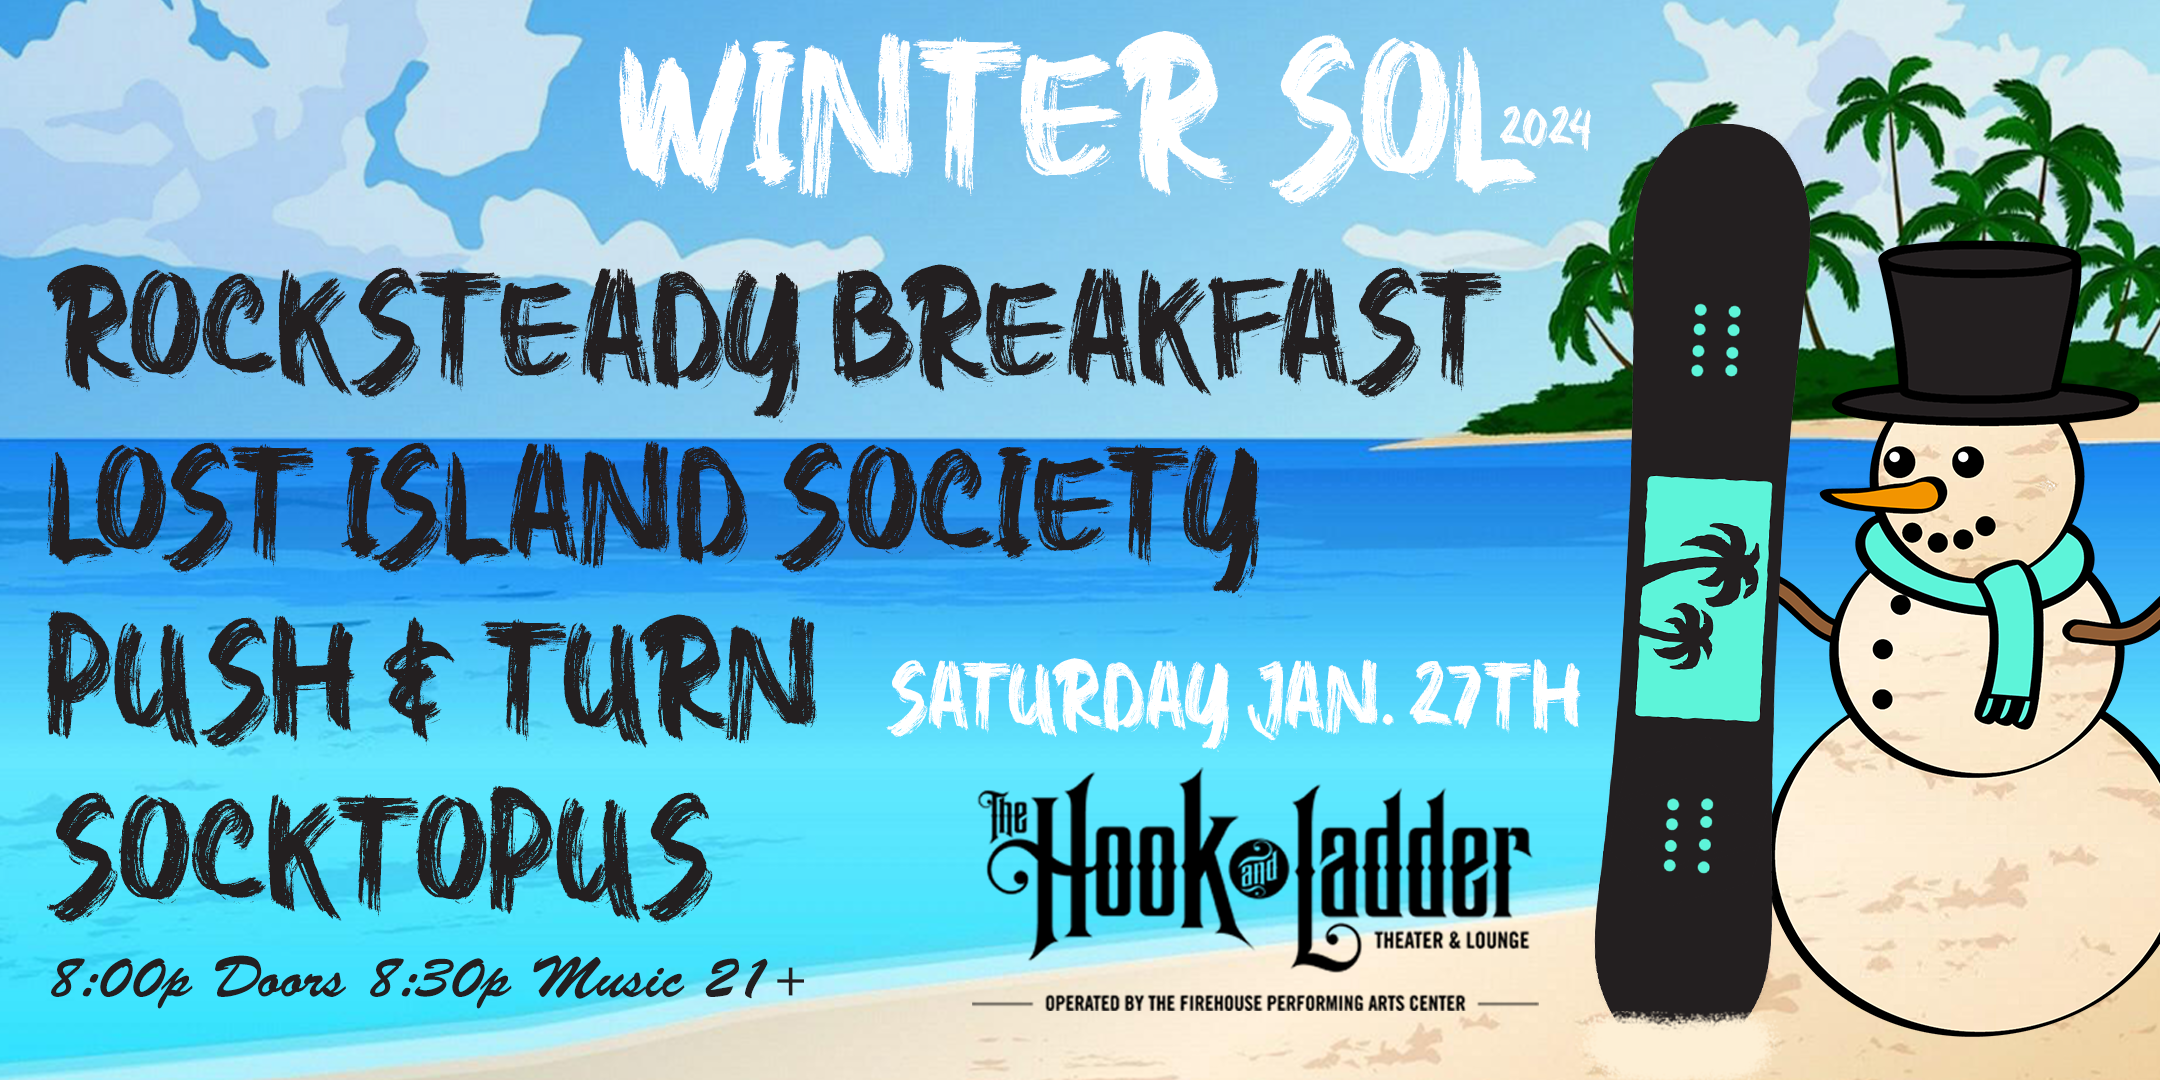 Winter Sol 2024 Rocksteady Breakfast | Lost Island Society | Socktopus | Push & Turn Saturday, January 27 The Hook and Ladder Theater Doors ​8:00pm :: Music ​8:30pm :: 21+ $1​2 ADV / $​17 DOS Tickets On Sale Now